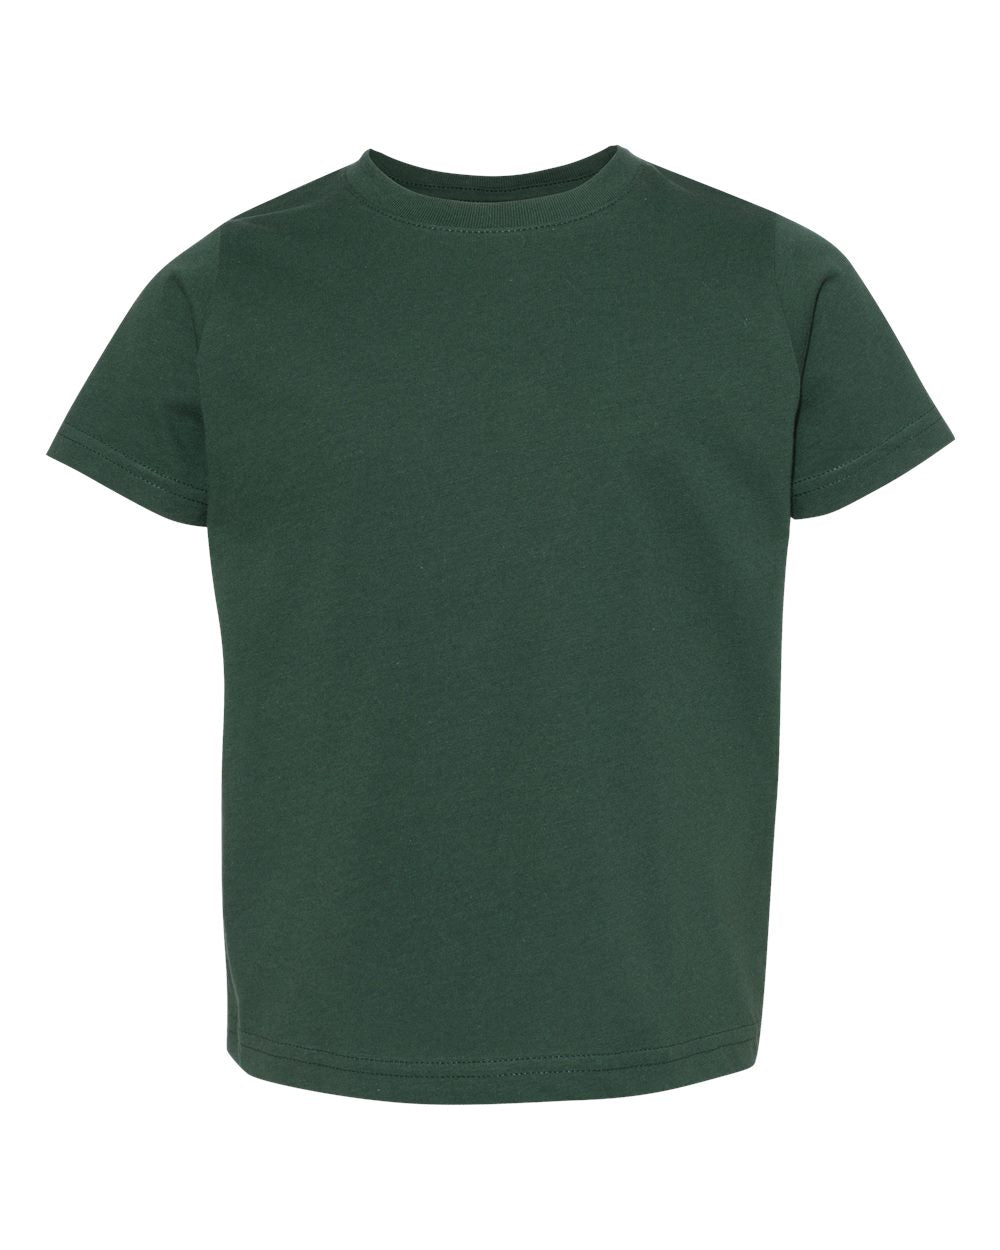 rabbit skins toddler jersey tee forest green